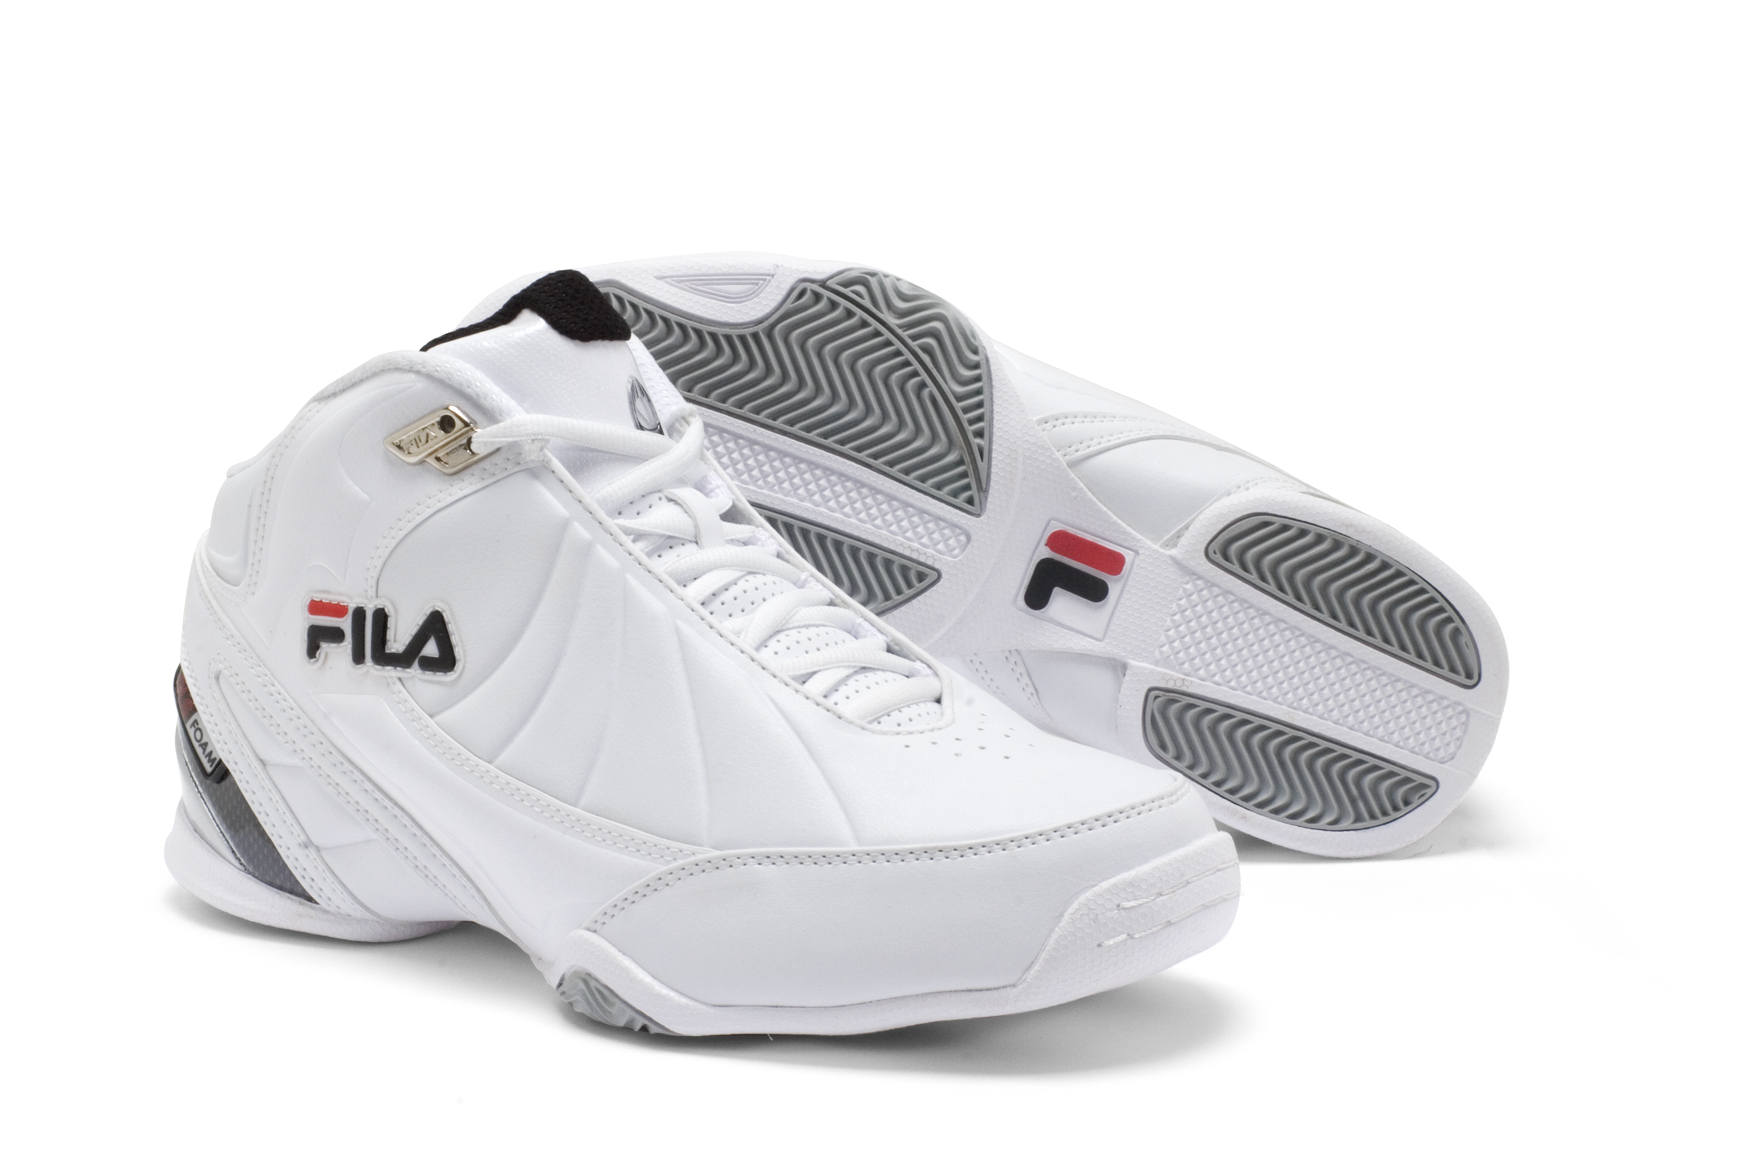 Fila Launches Grassroots Basketball Initiative: Fila to Partner with T. White, Inc. to Market Footwear Collection